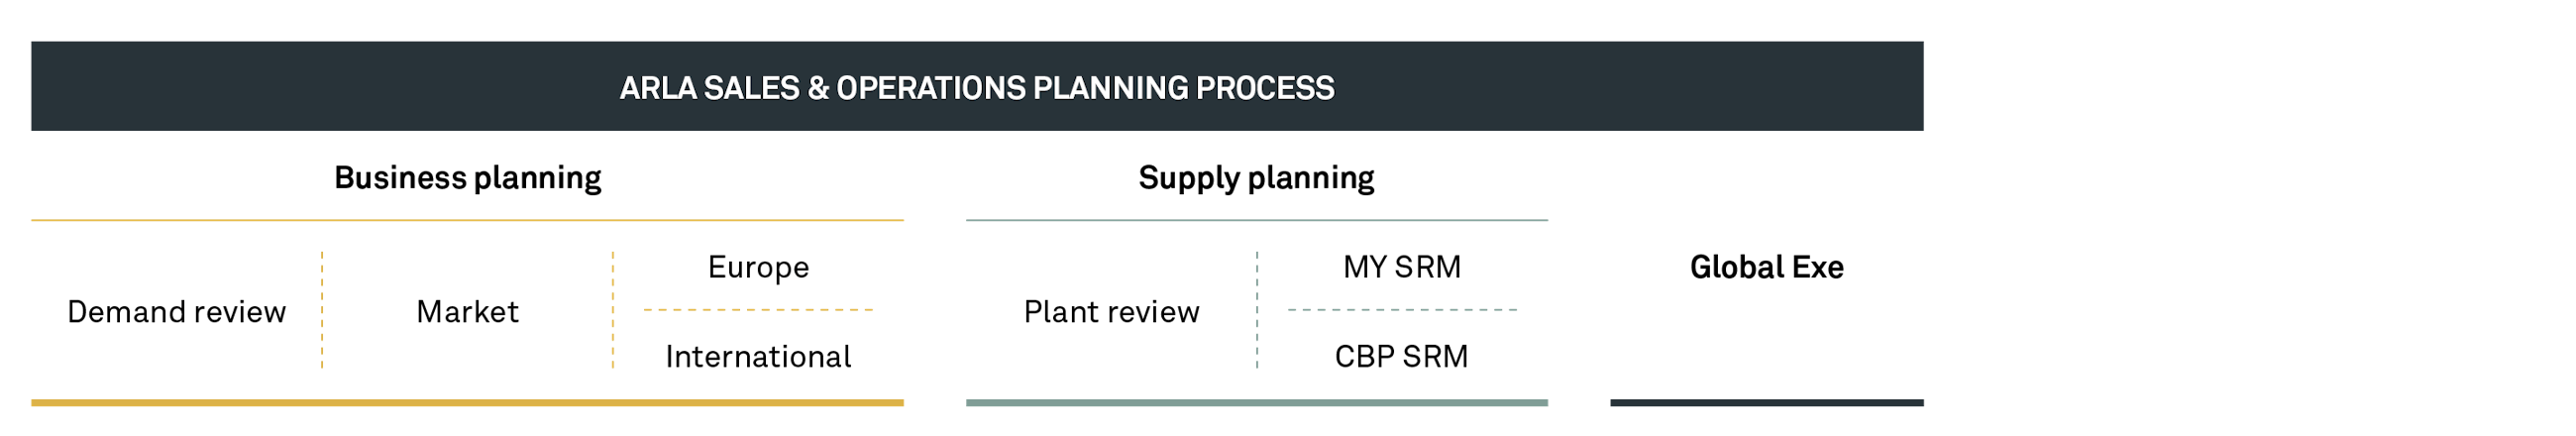 Case 3 Arla One planning and allocation 2